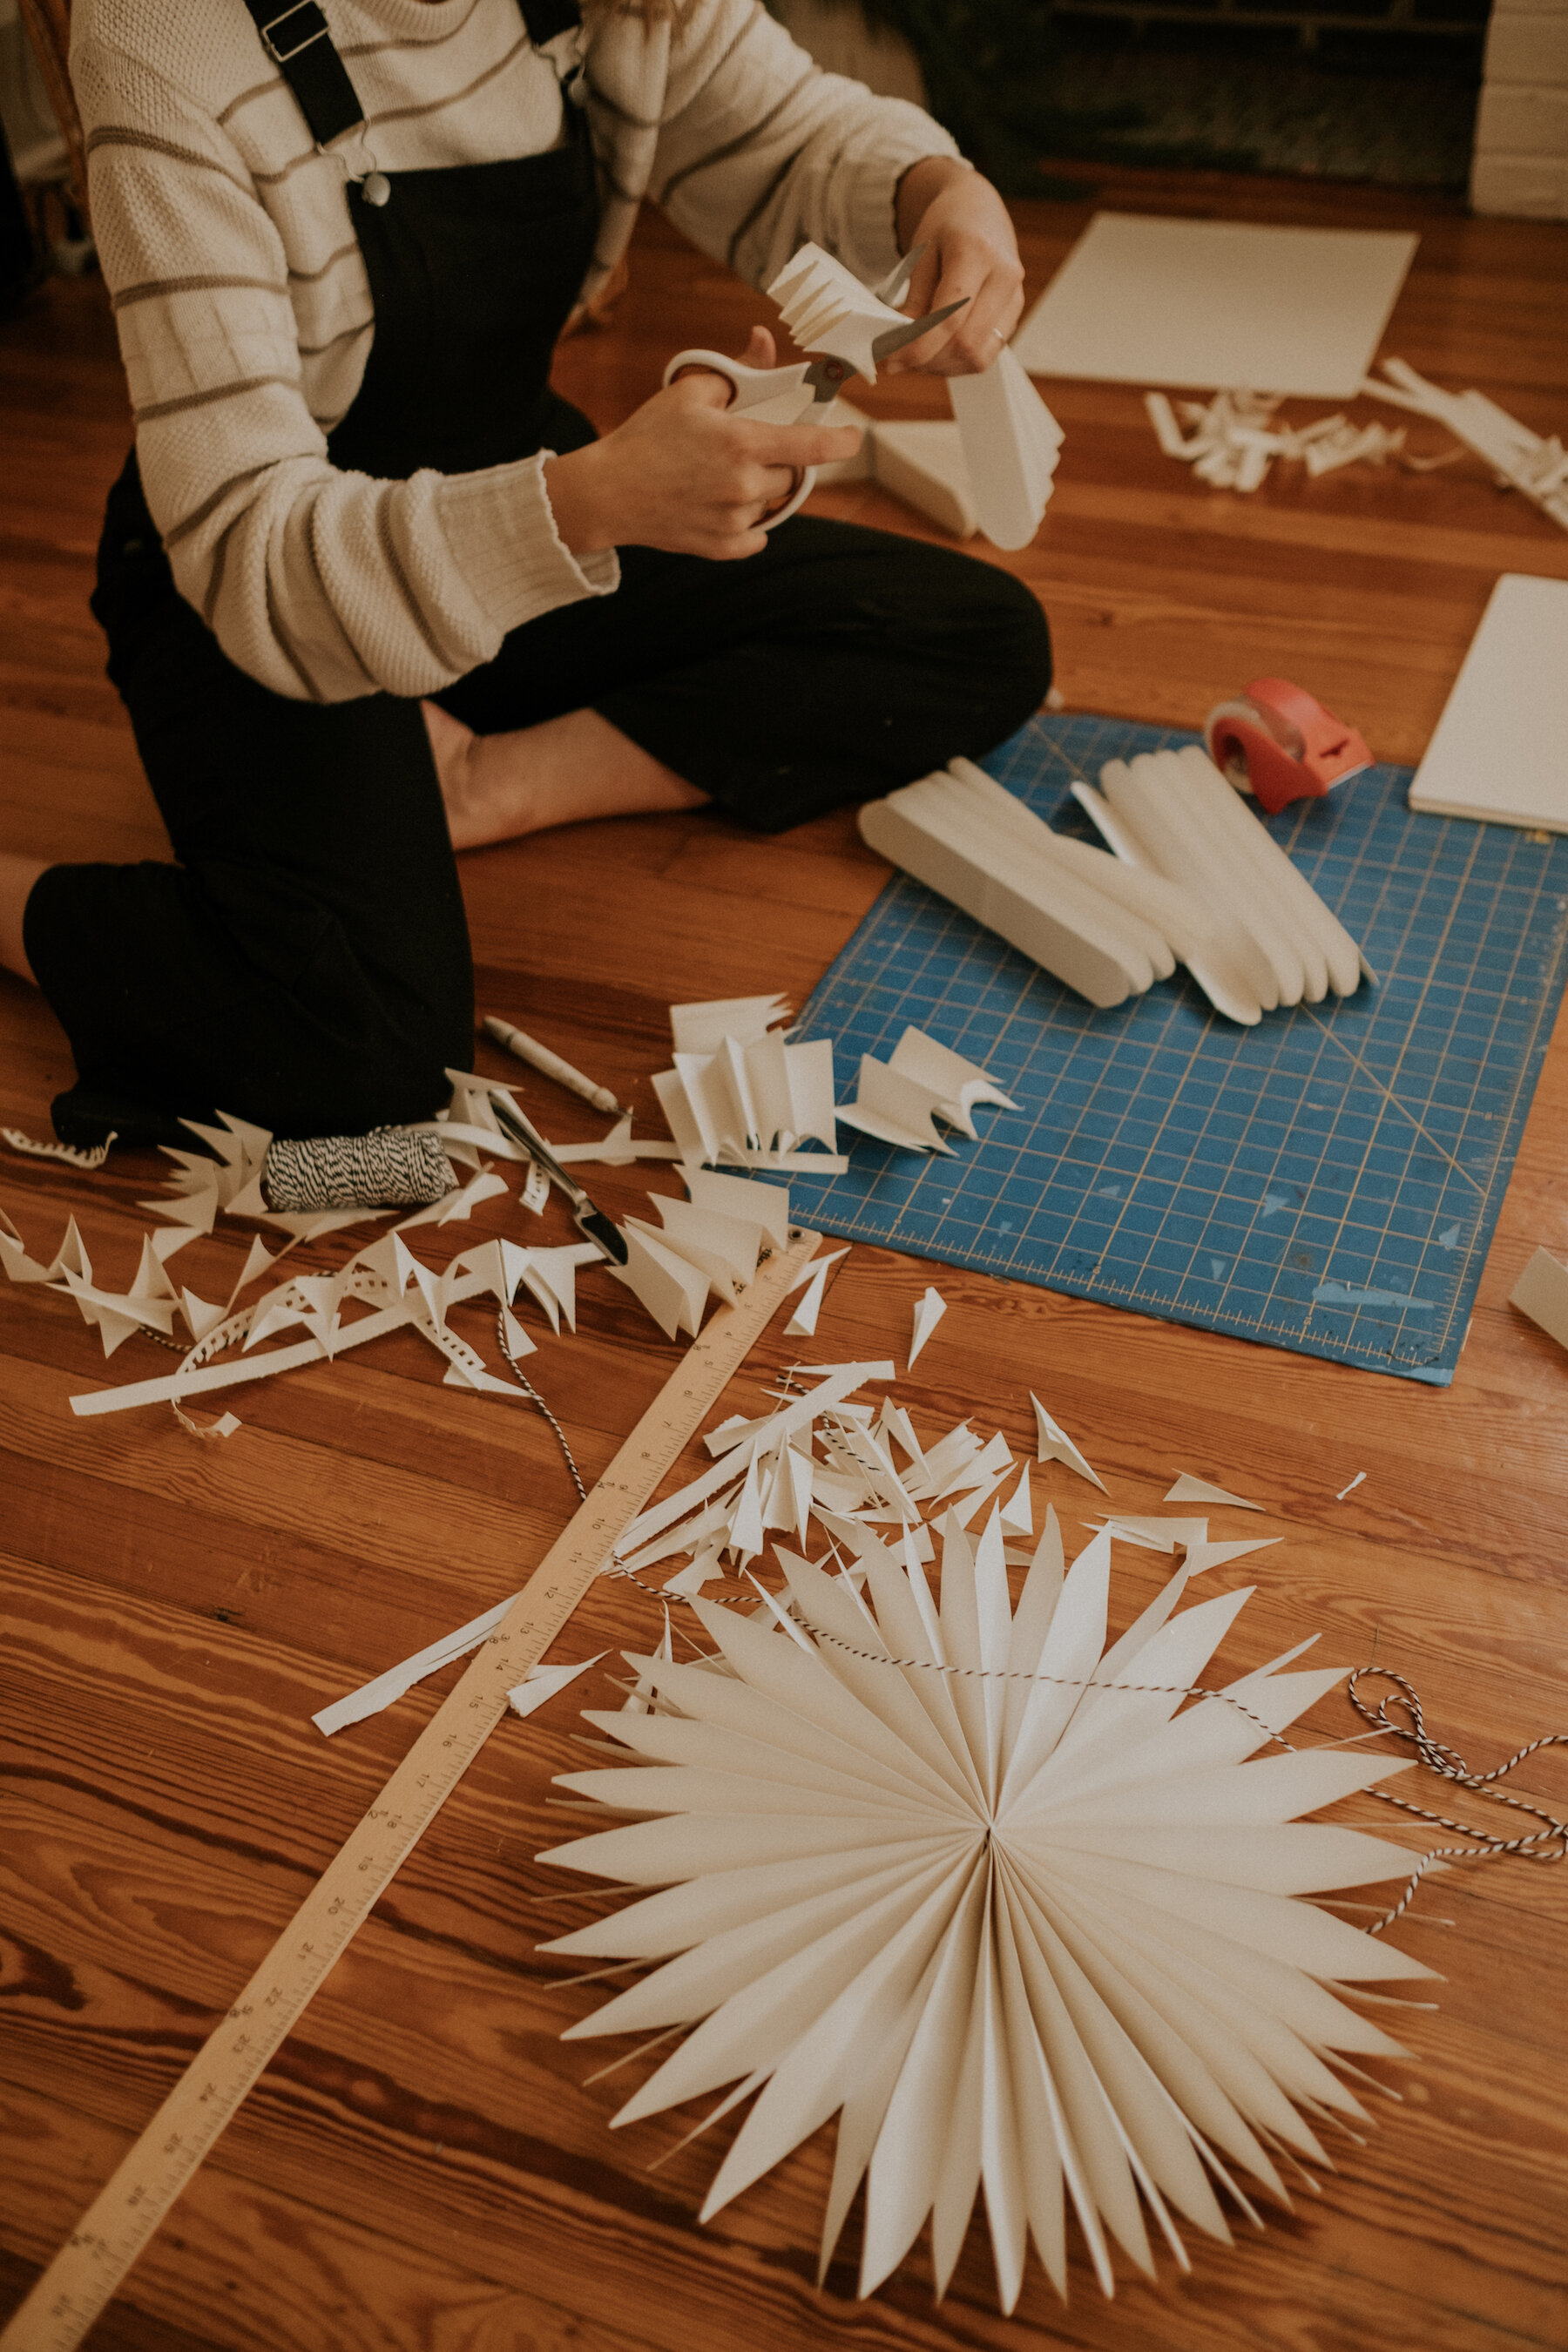 How to Make a Holiday Paper Star - TinkerLab